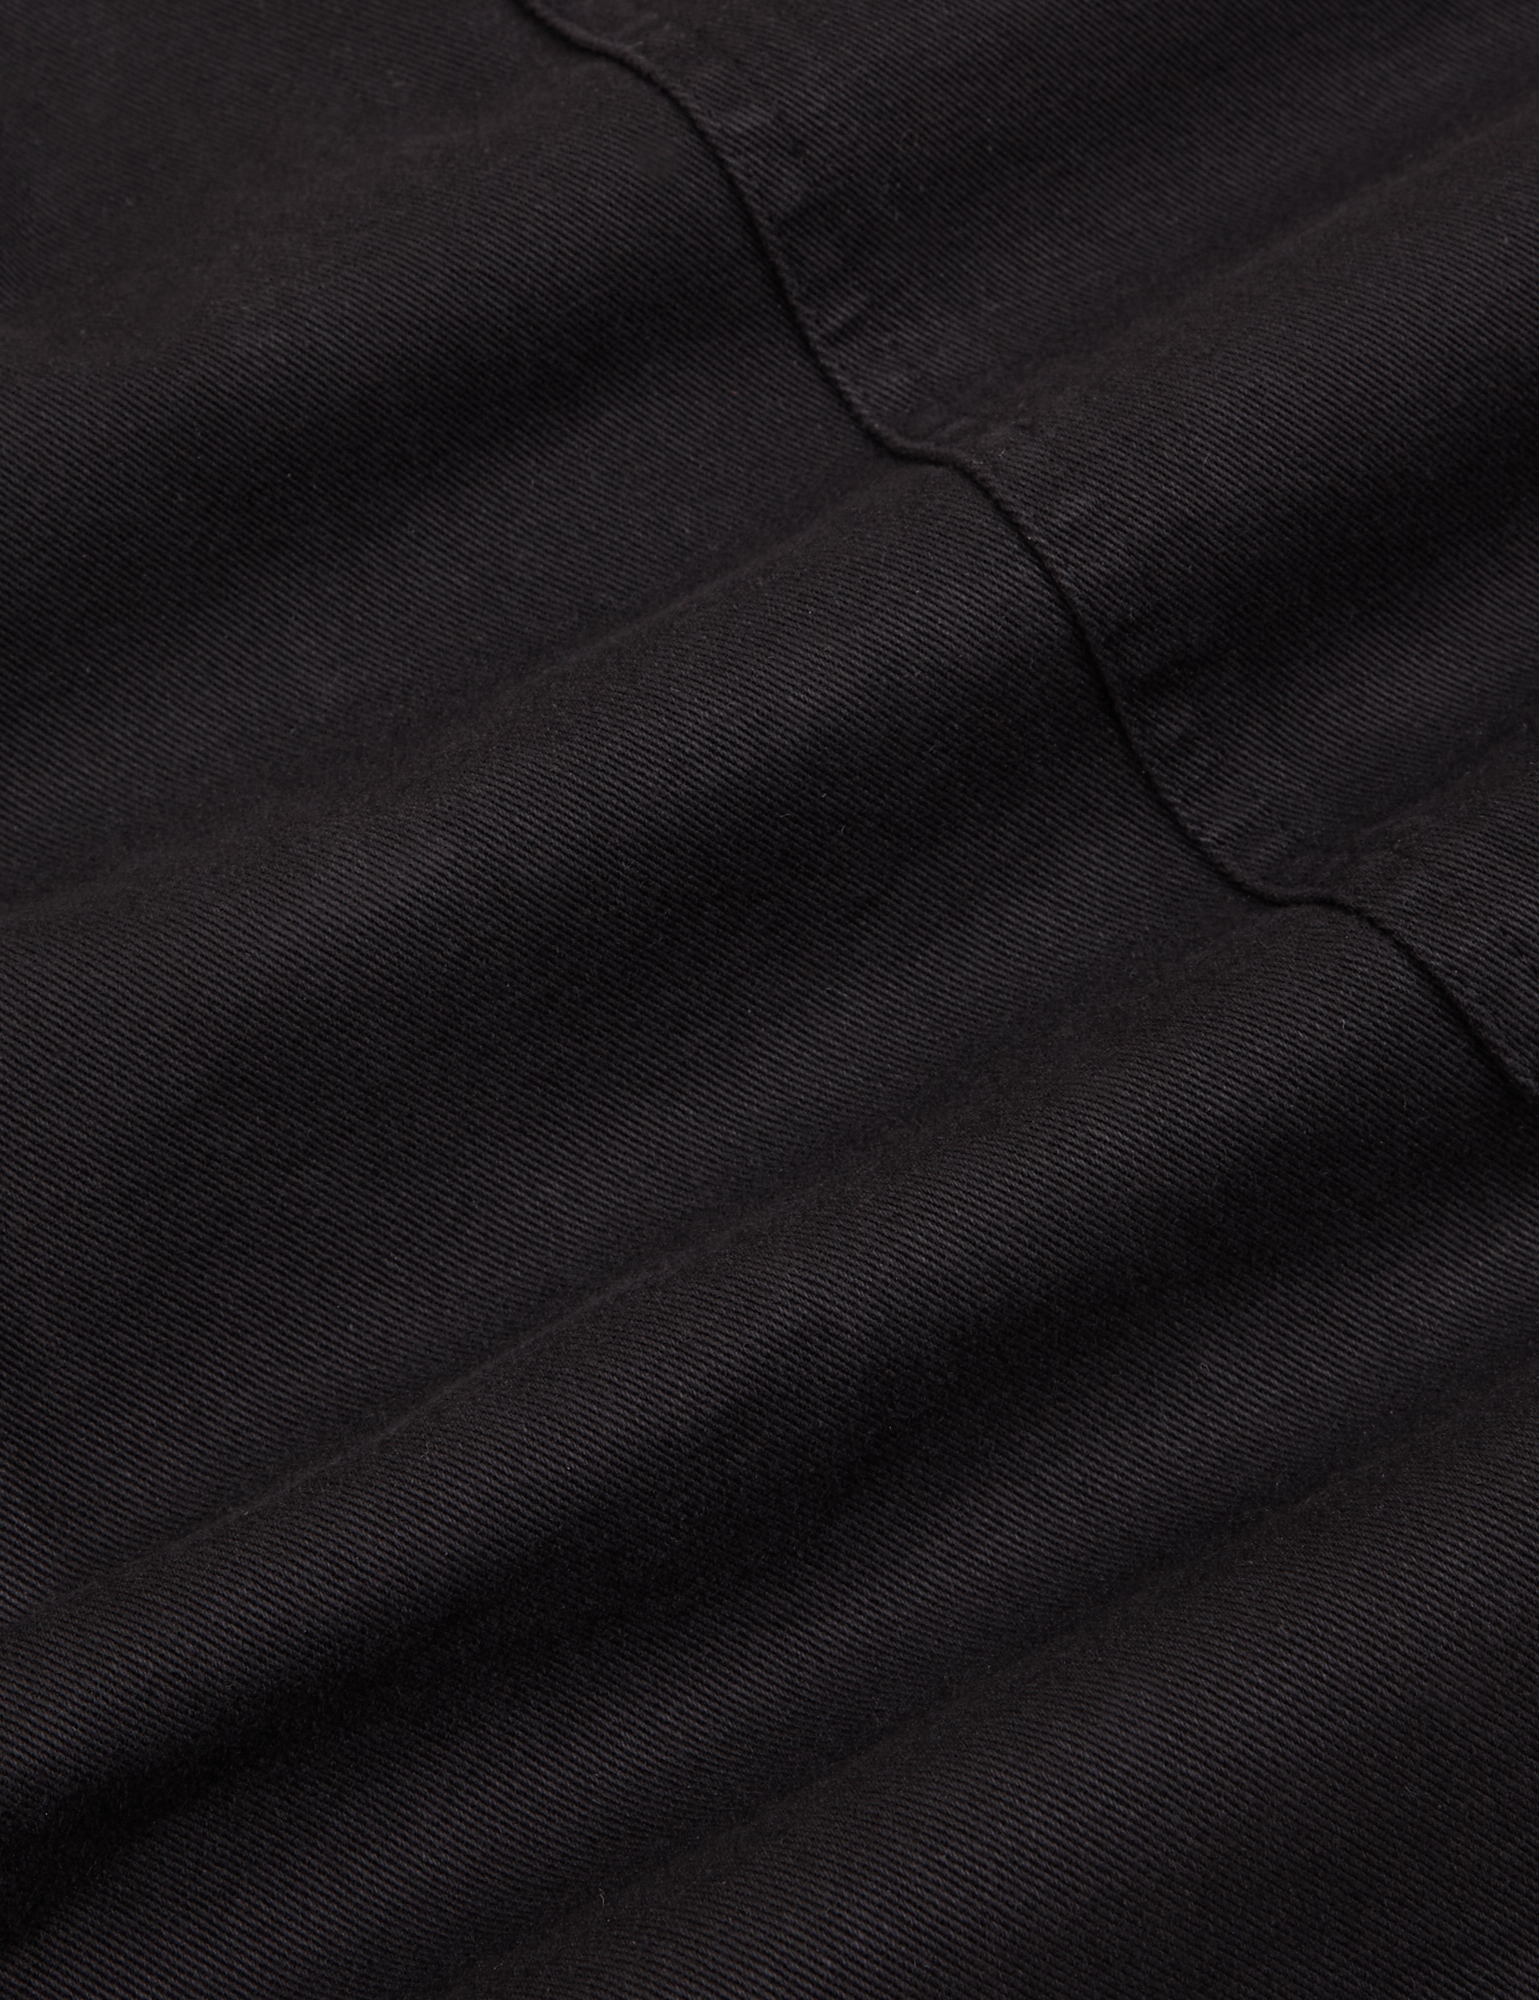 Classic Work Shorts in Basic Black fabric detail close up